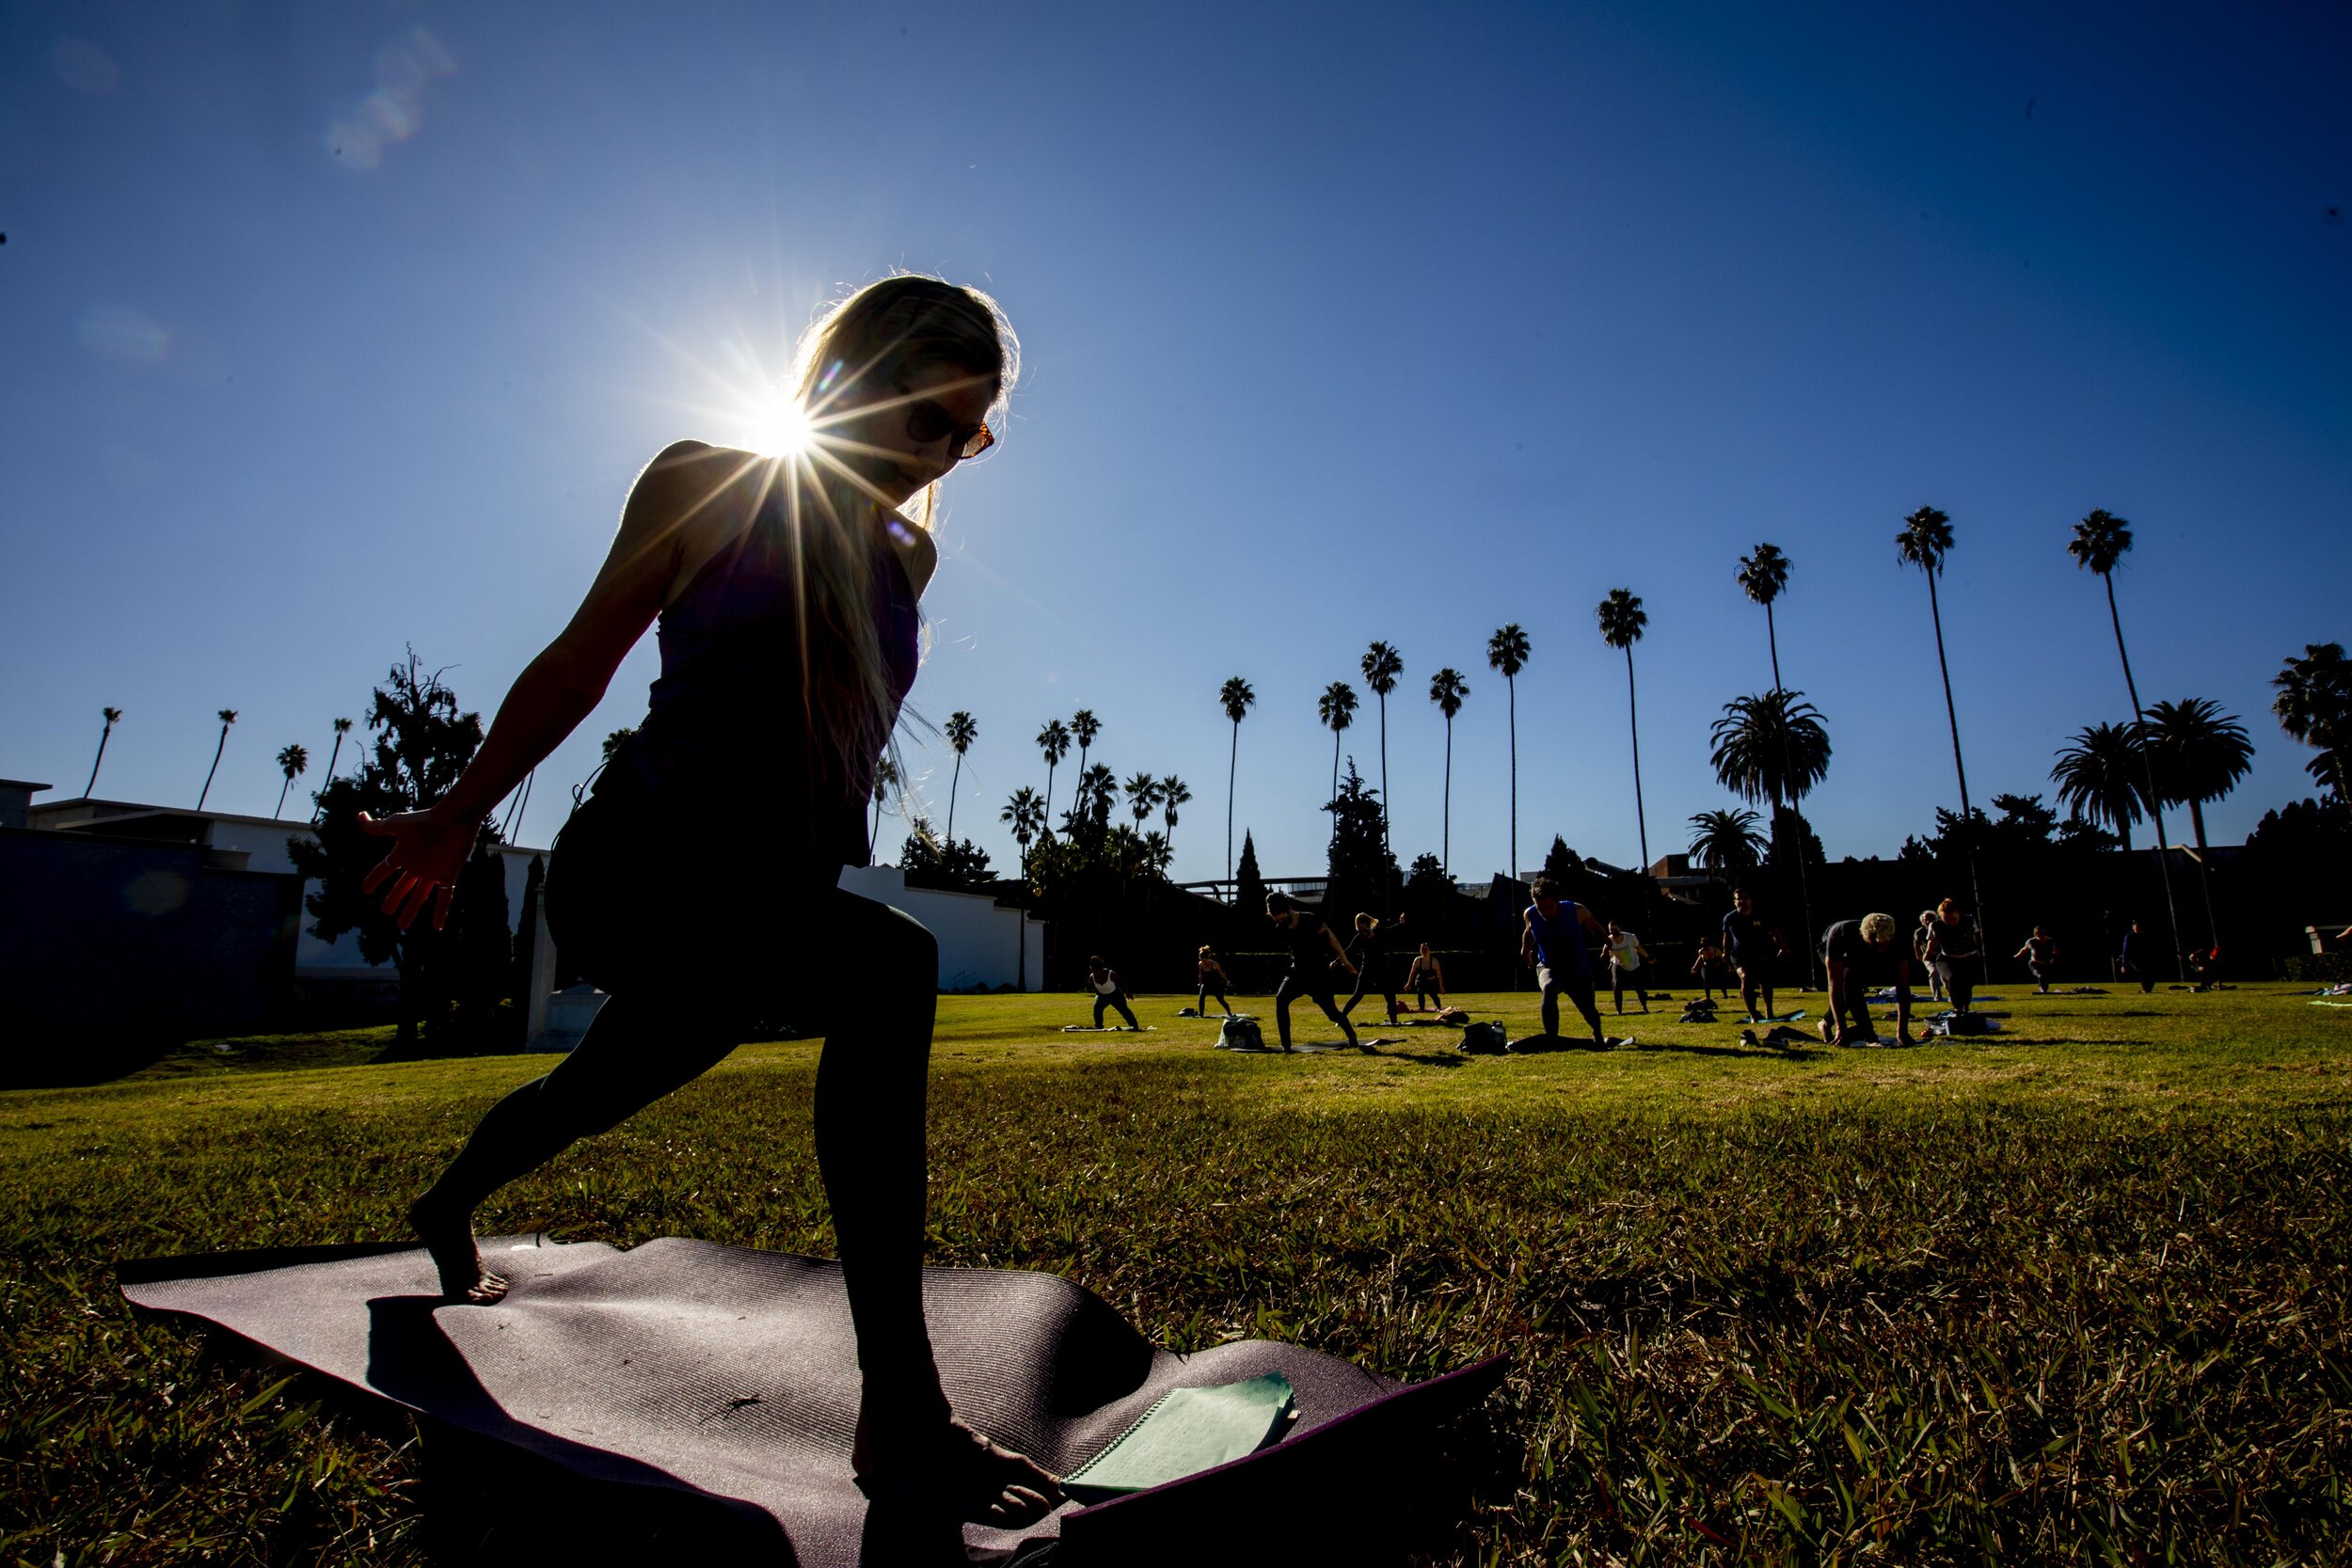  Yoga instructor Mary DeCaro (@thatlayogi) teaches her Vinyasa Flow yoga class on the Fairbanks Lawn  at Hollywood Forever cemetery in the Hollywood area of Los Angeles, Calif. The cemetery is offering  outdoor yoga classes 5 days a week, DeCaro teac